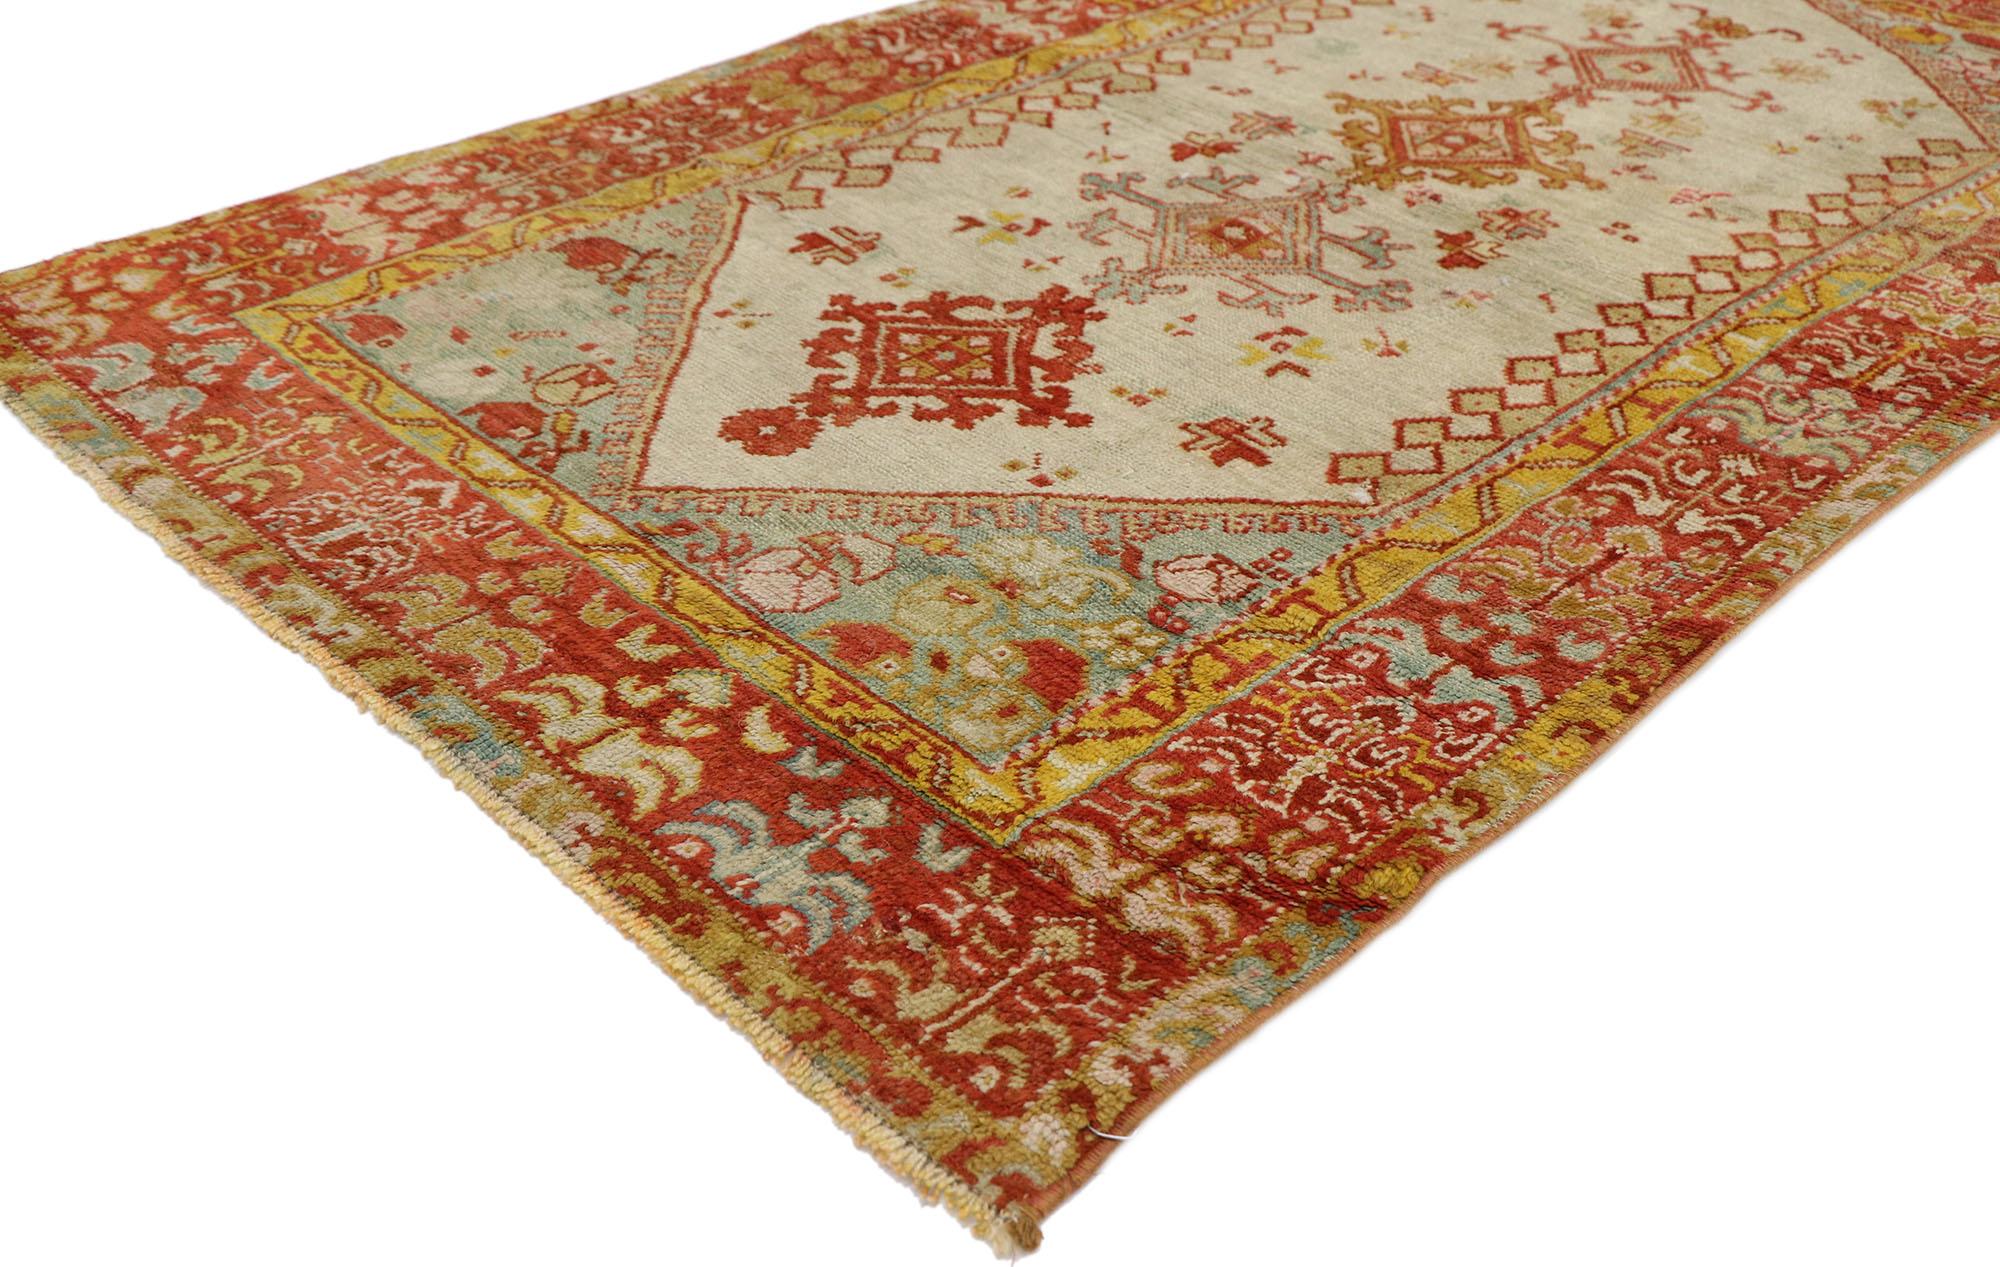 53564, antique Turkish Oushak rug with Northwestern style. With its luminous warm hues and beguiling beauty, this hand-knotted wool antique Oushak rug is immersed in Anatolian history. The abrashed beige field features four stacked lozenges